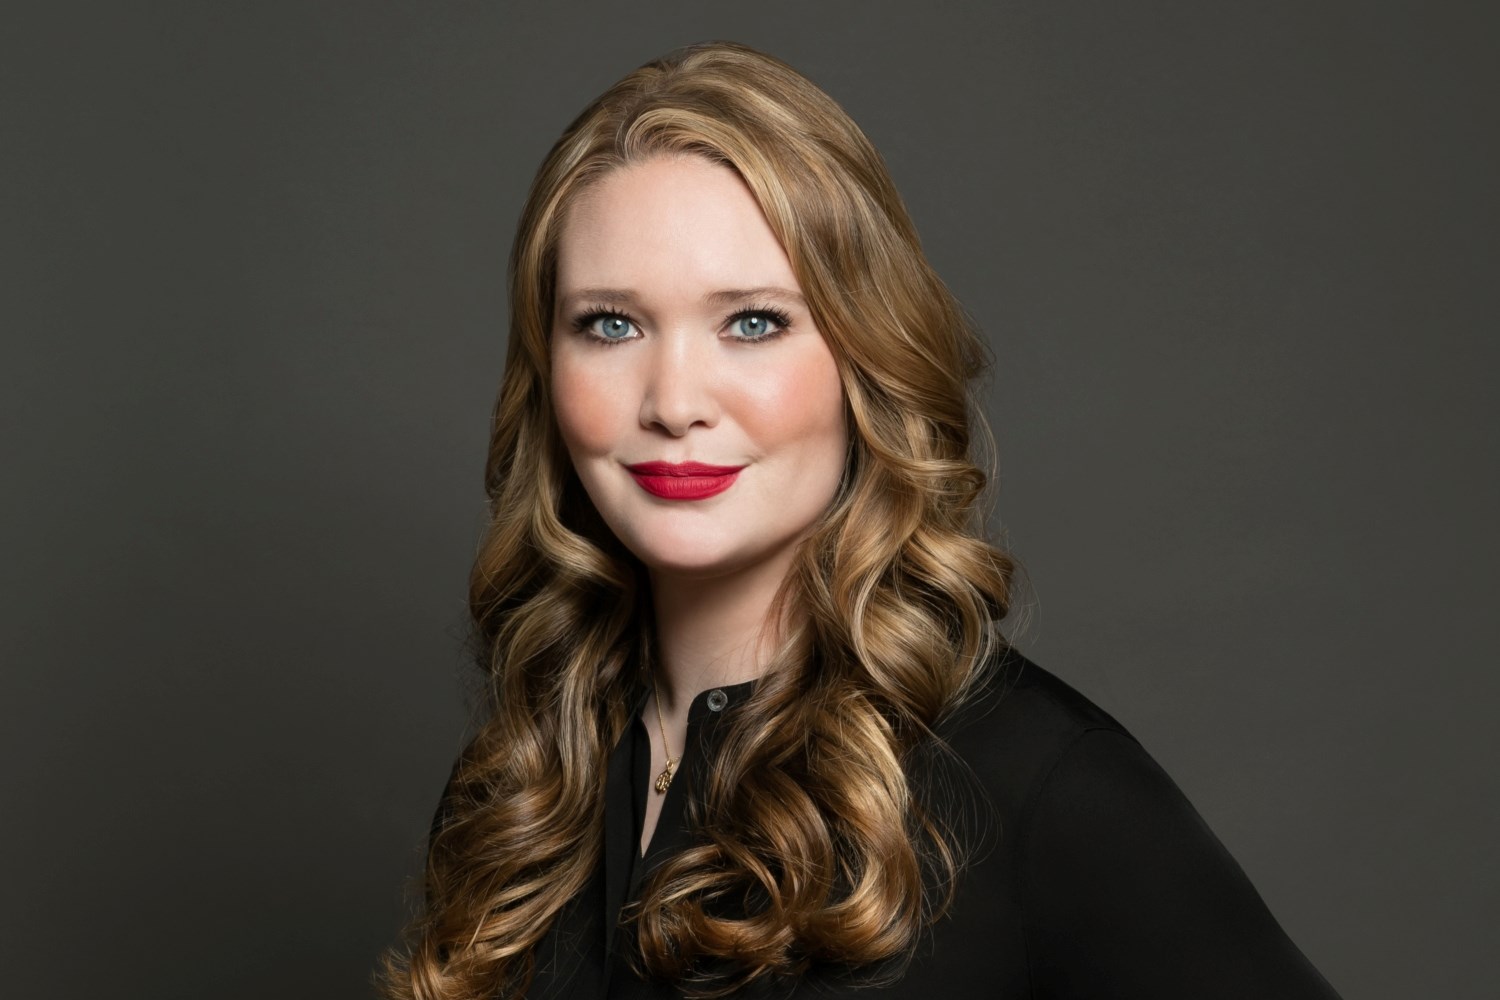 ‘A Court Of Thorns And Roses’ Author Sarah J Maas: The Books That Changed Her Life